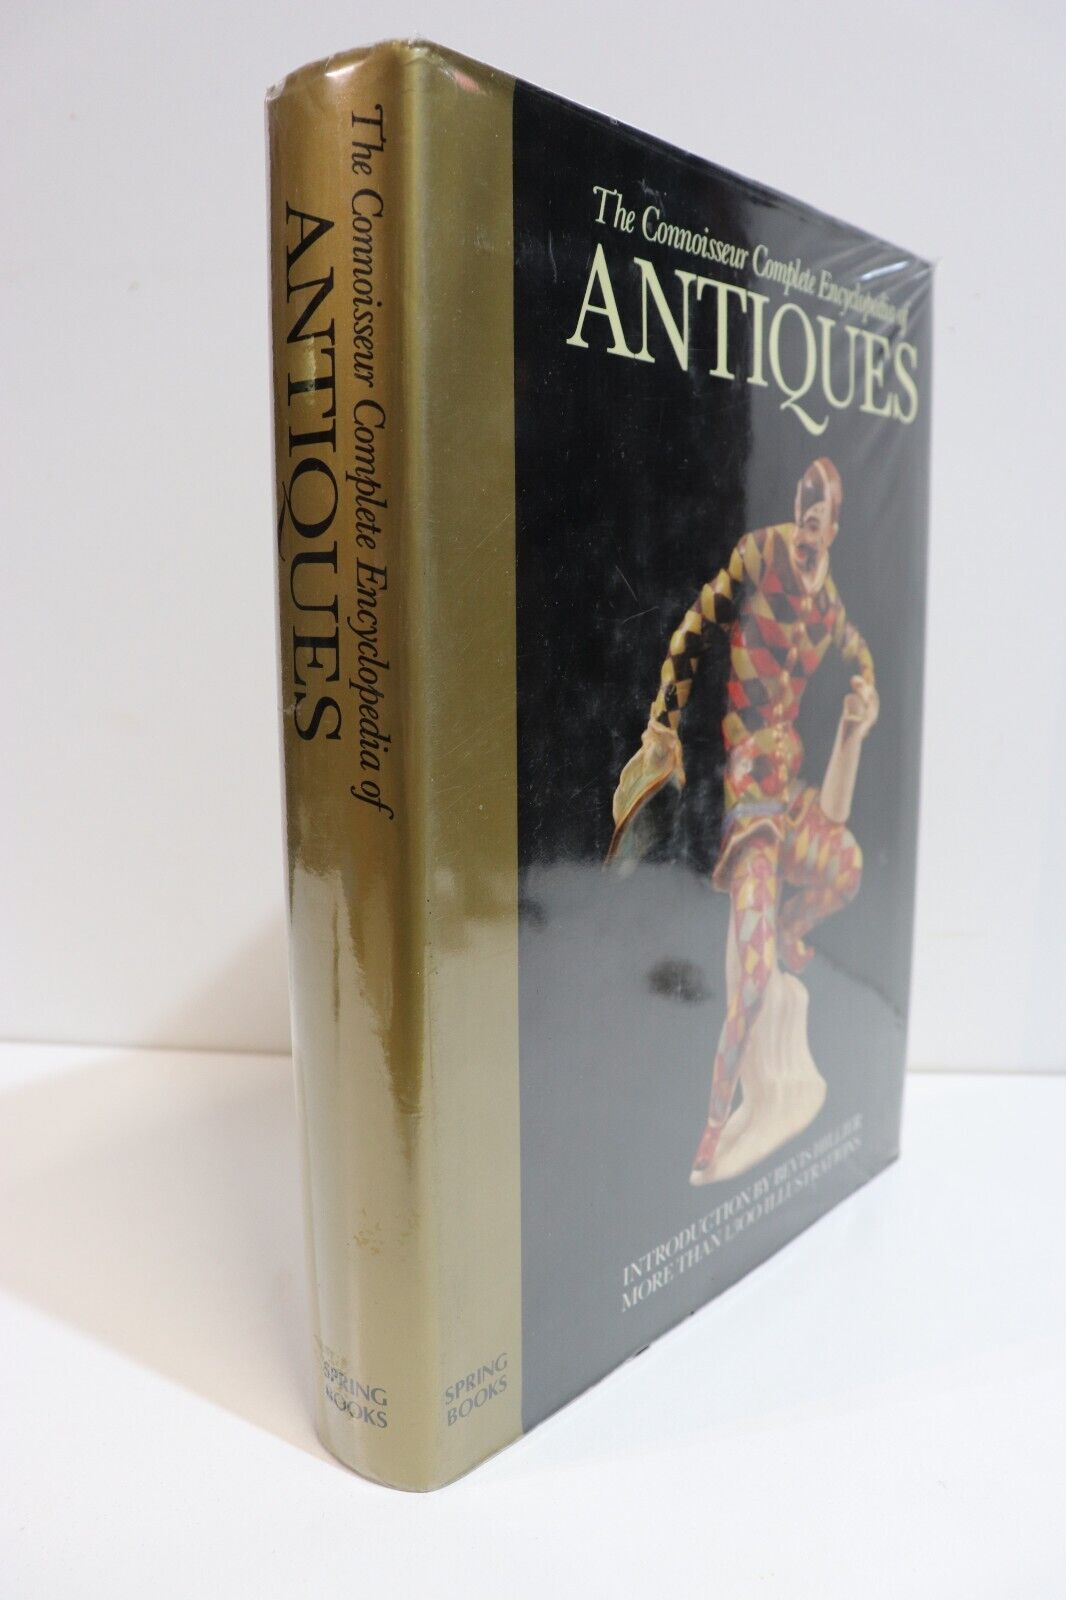 The Connoisseur Encyclopedia Of Antiques - 1988 - Antiques Reference Book